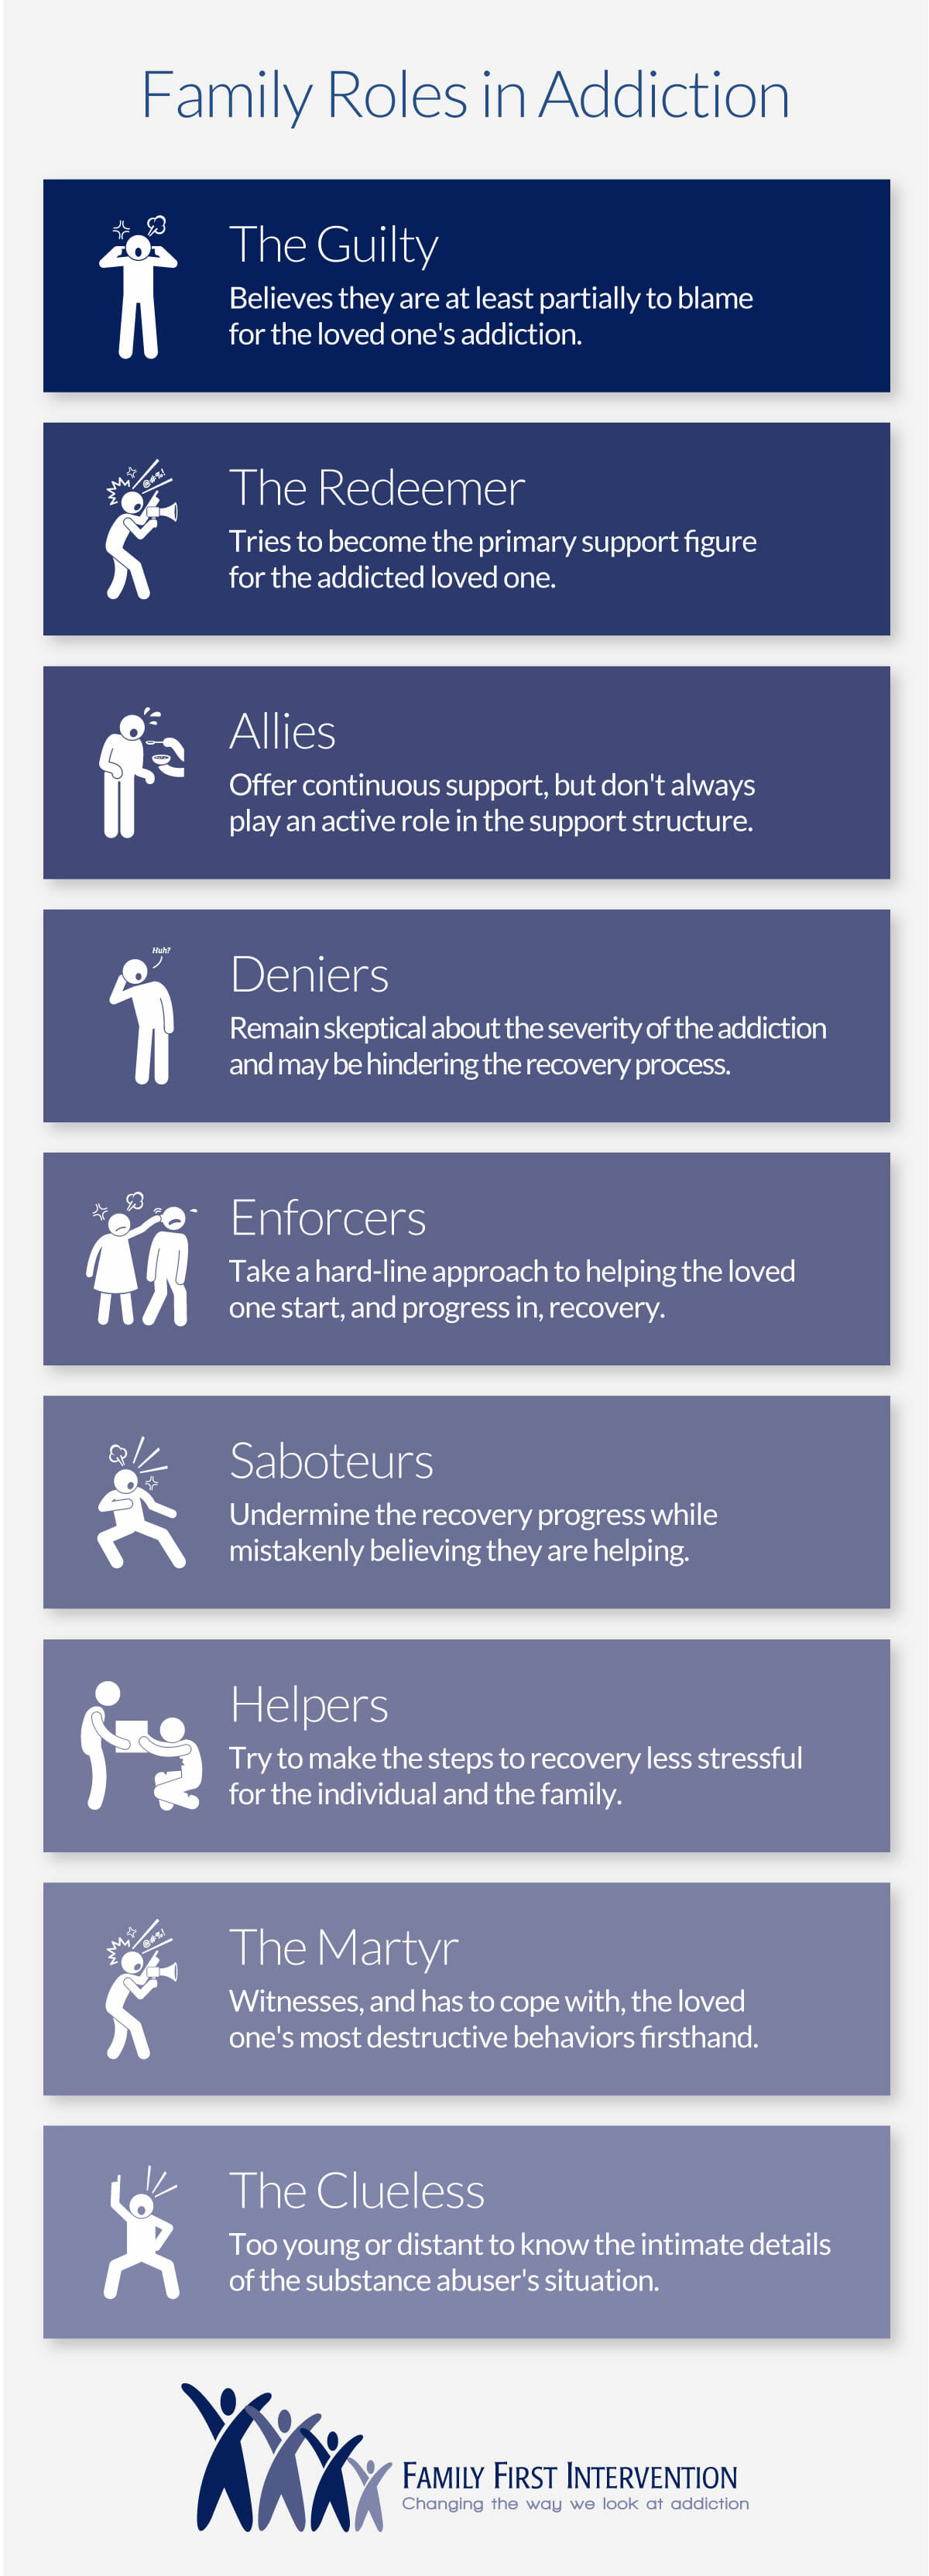 family roles in addiction - infographic - family first intervention